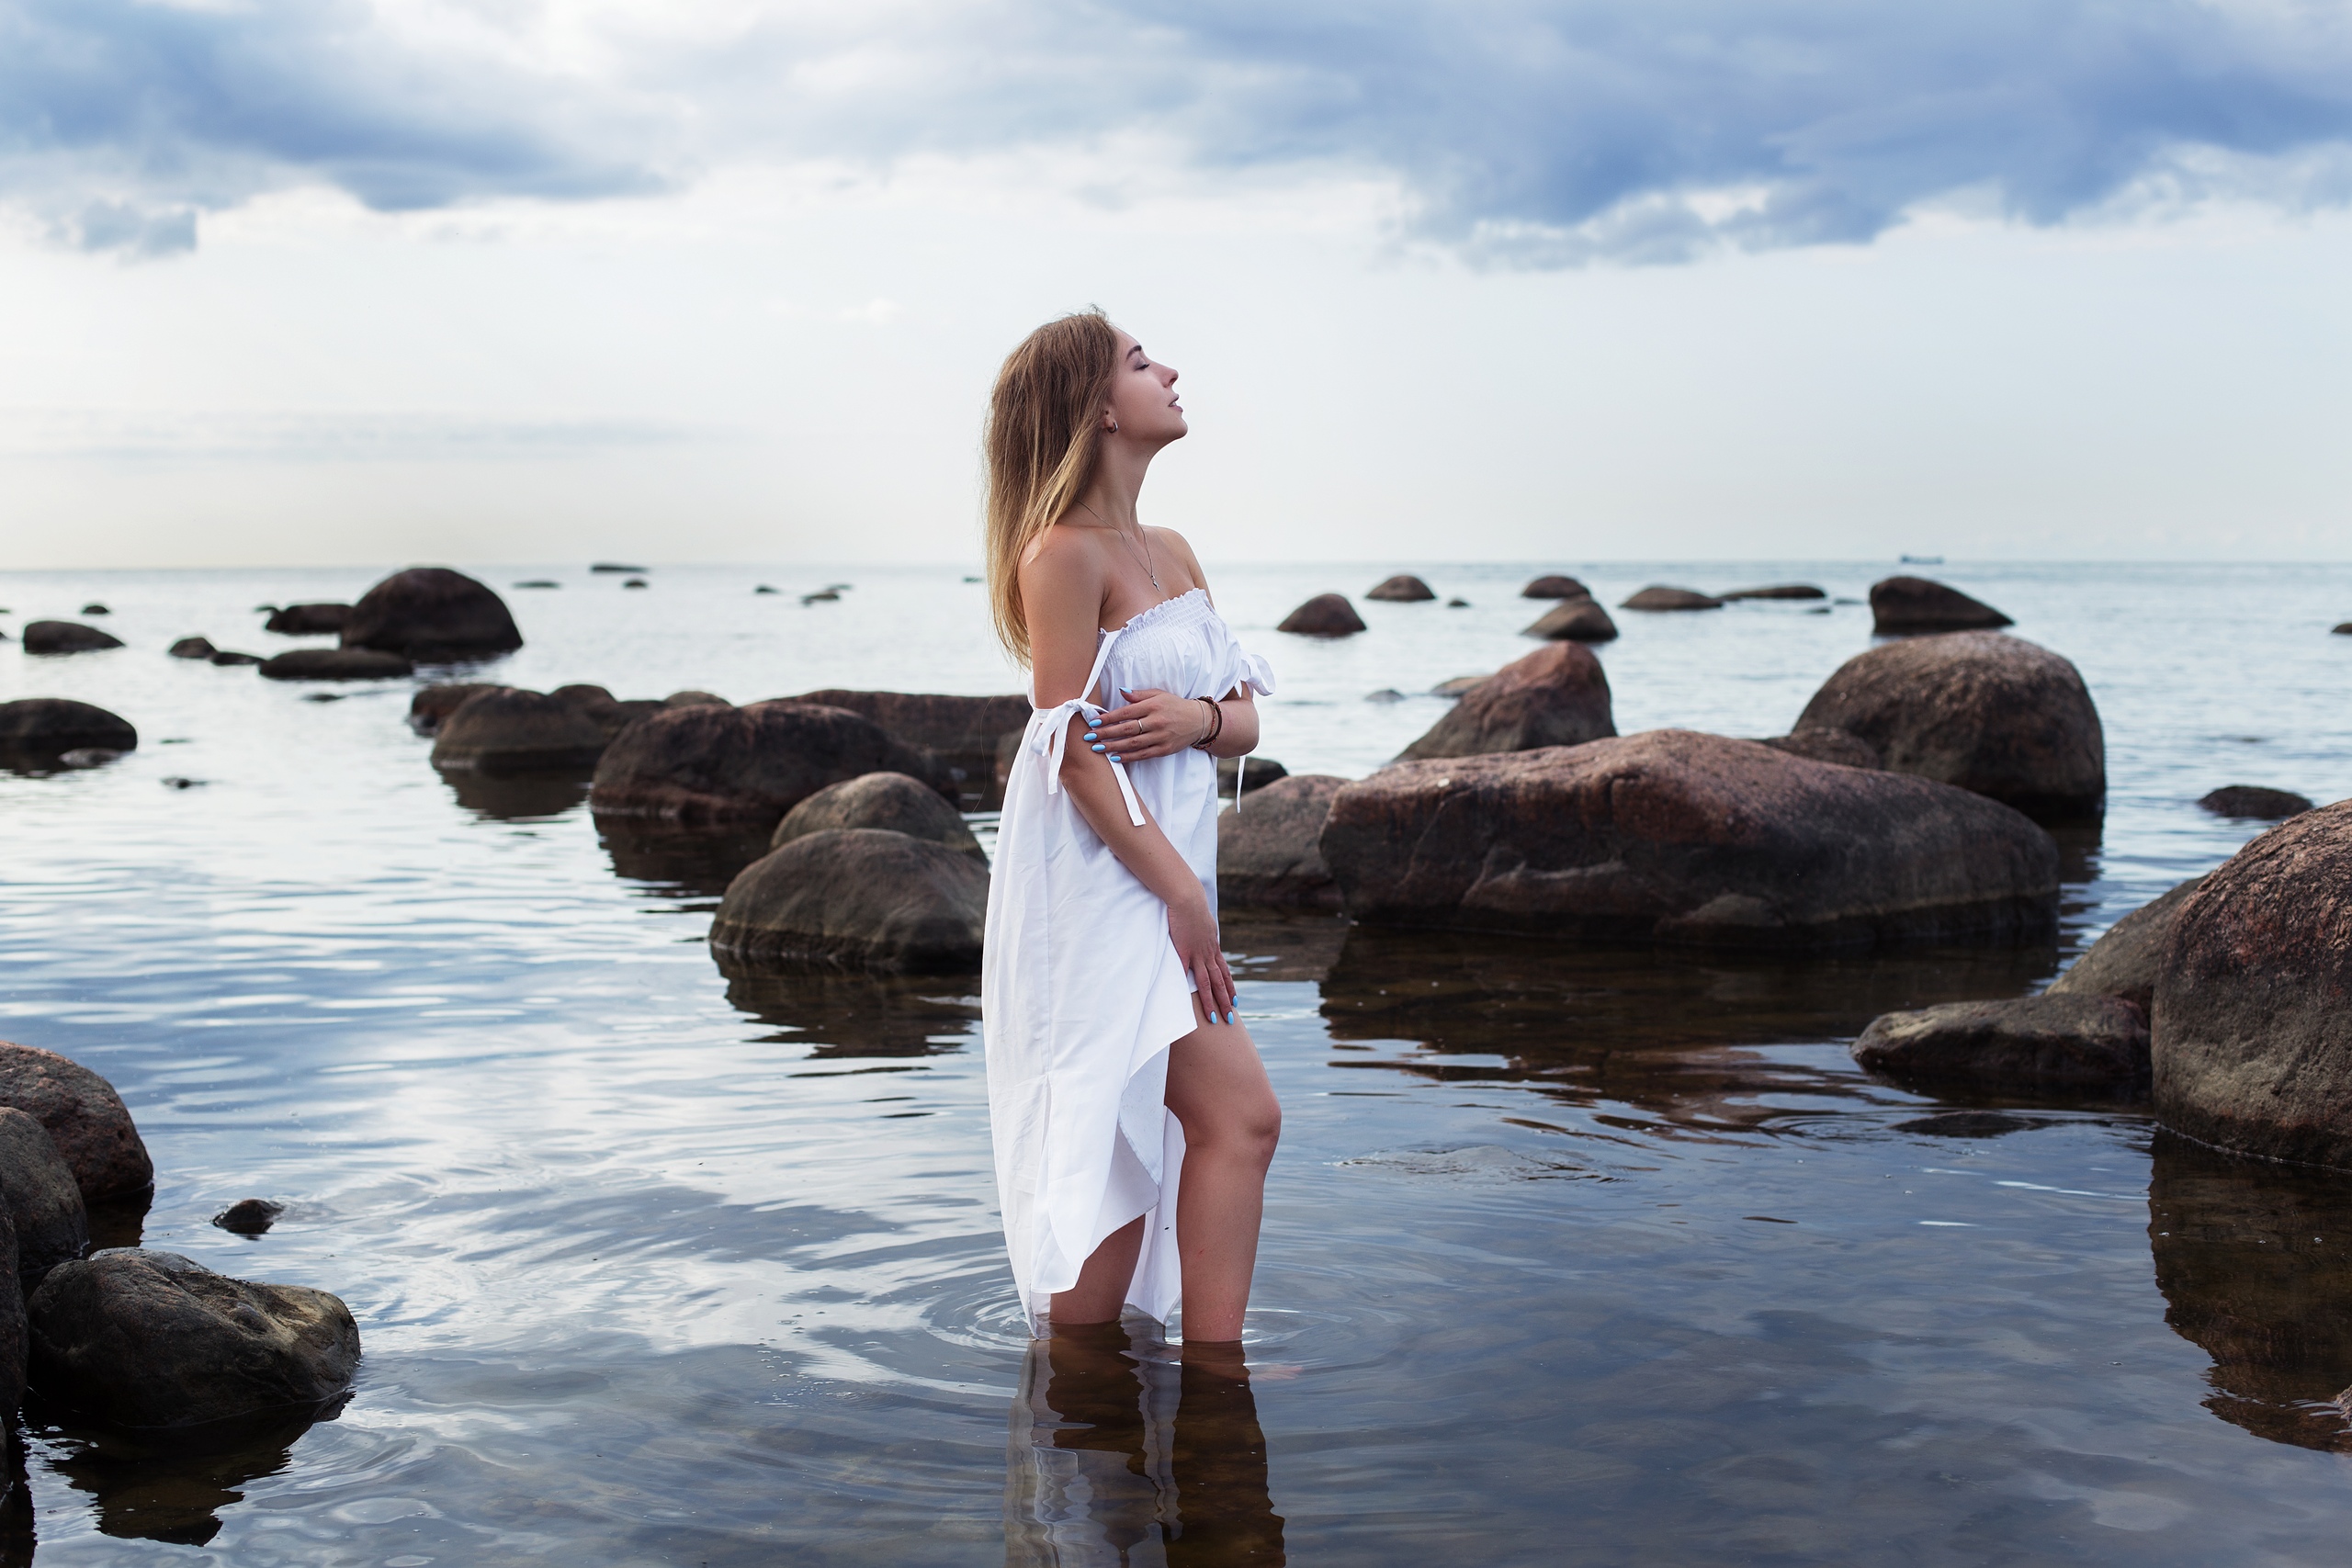 People 2560x1707 women model closed eyes profile smiling necklace bare shoulders dress white dress white clothing standing painted nails in water water sea rocks clouds sky horizon landscape depth of field nature outdoors women outdoors side view